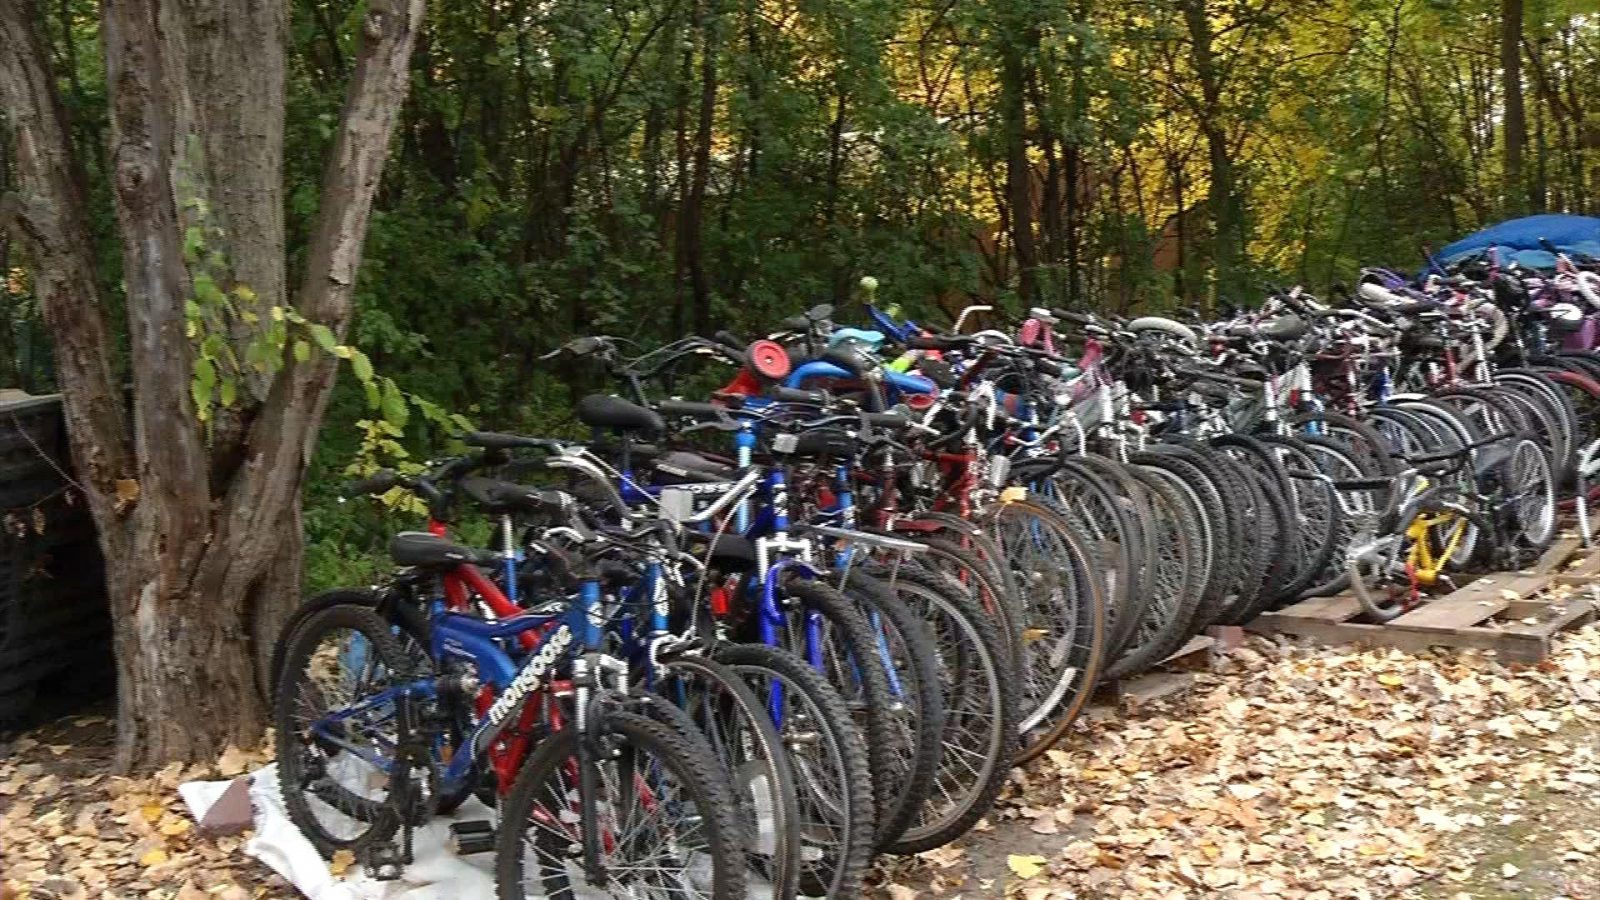 Allina Health Locations Accepting Bike Donations on Saturday, Oct. 8